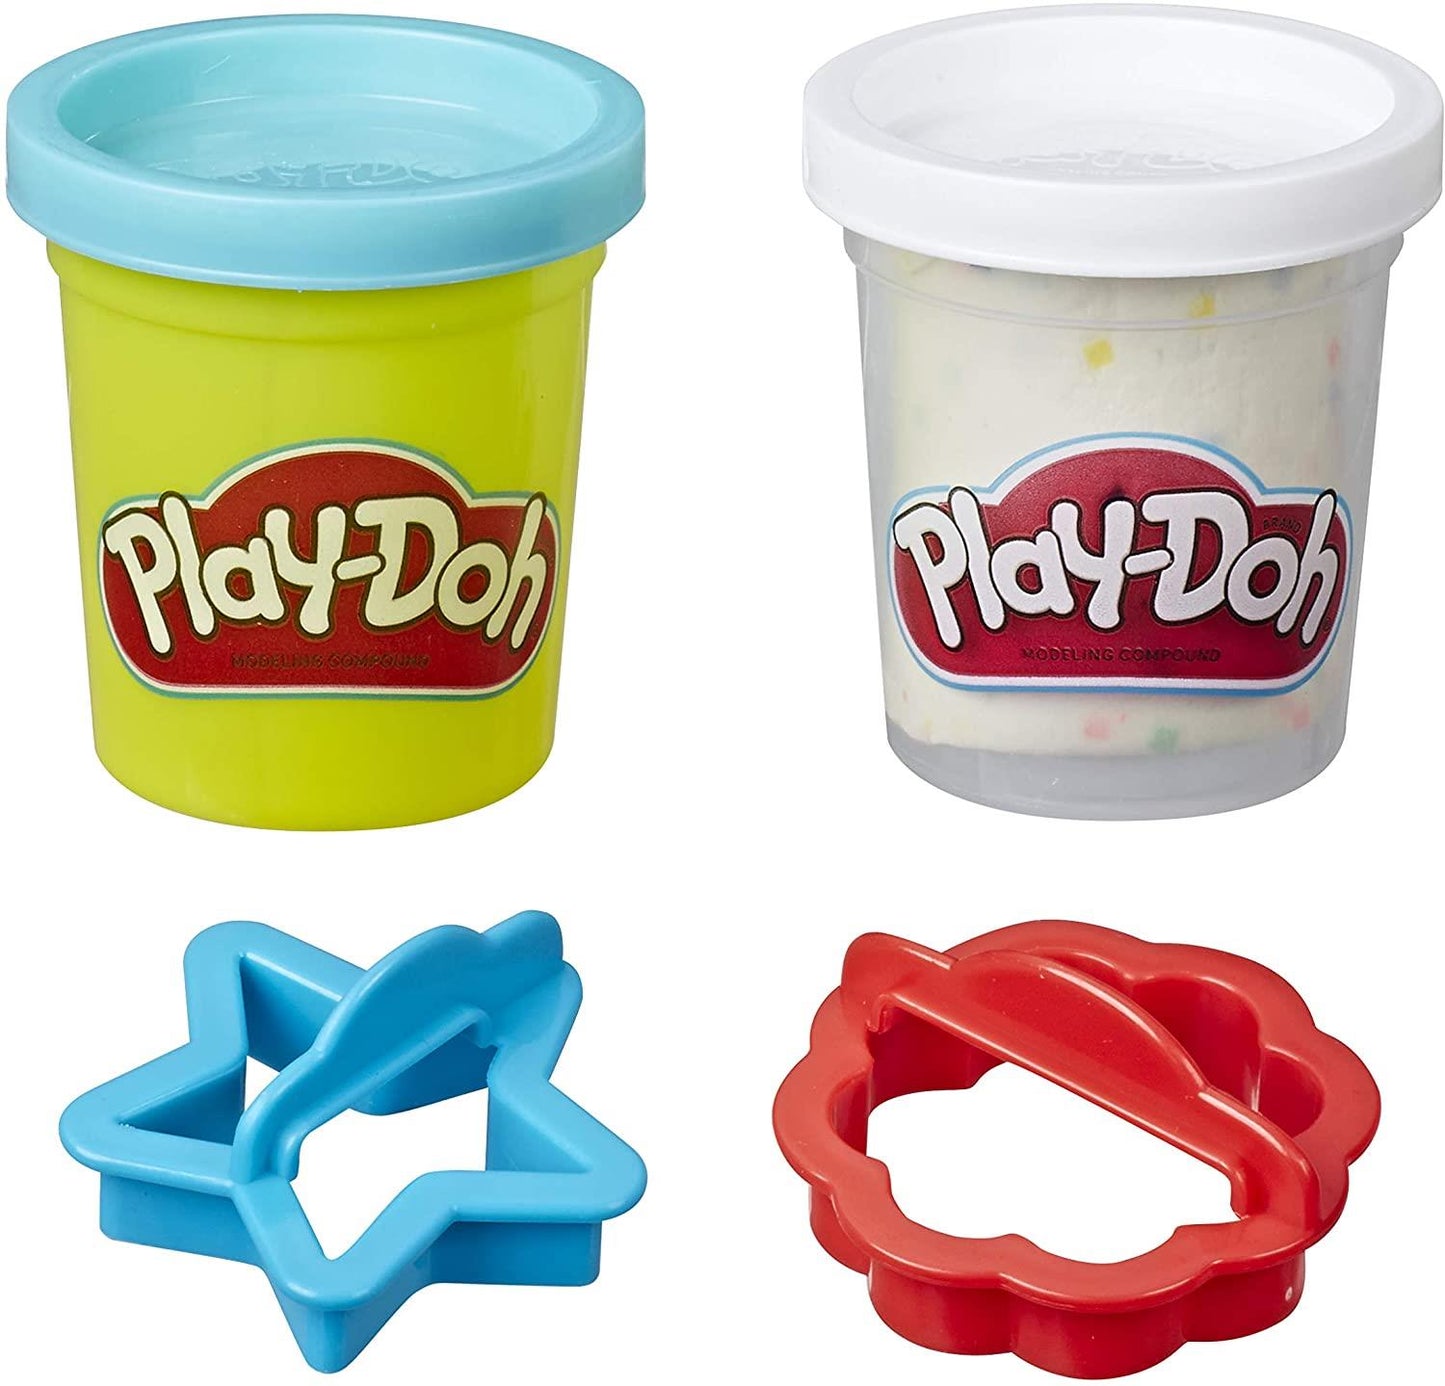 PLAY-DOH BLUE Sugar Cookie Canister Play Food Set avec 2 couleurs non toxiques